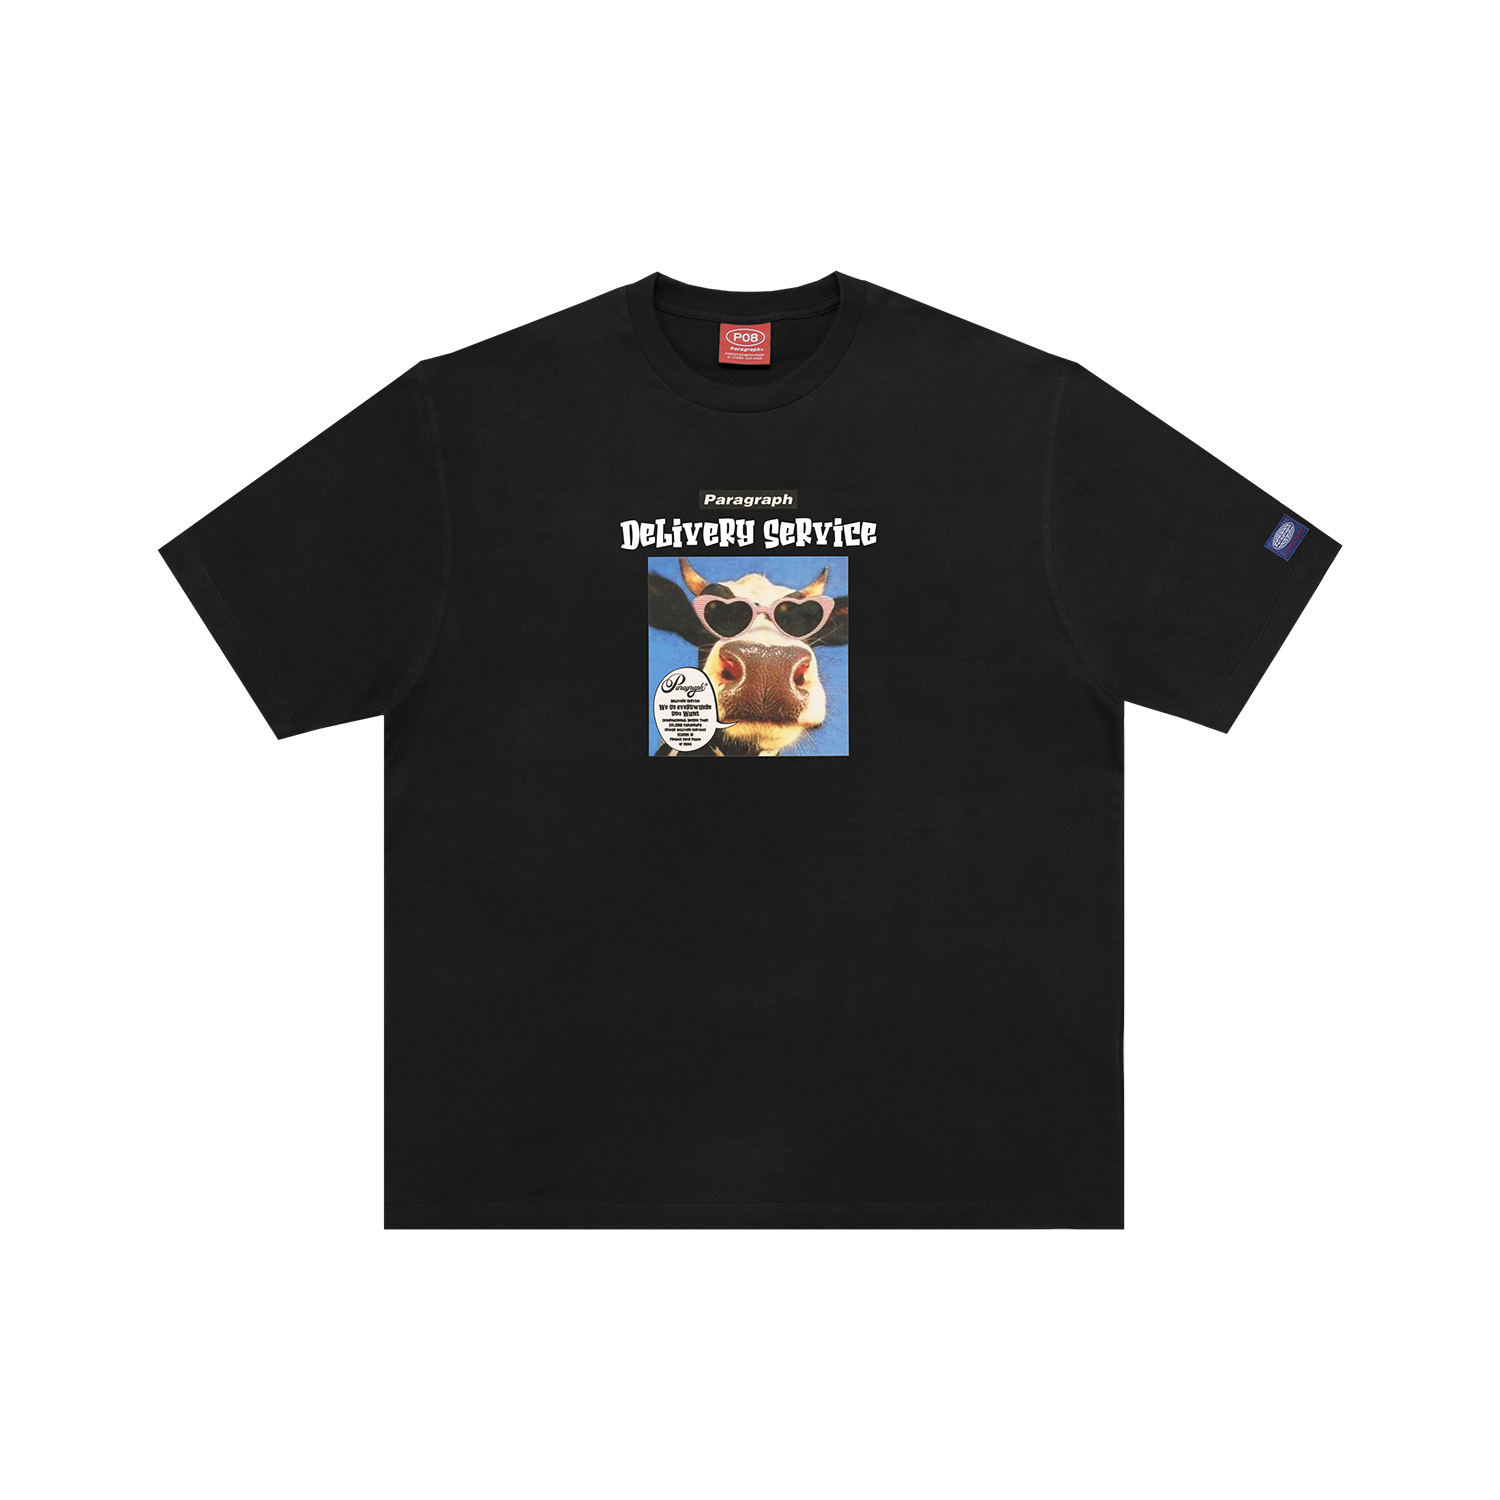 DELIVERY SERVICE T SHIRT